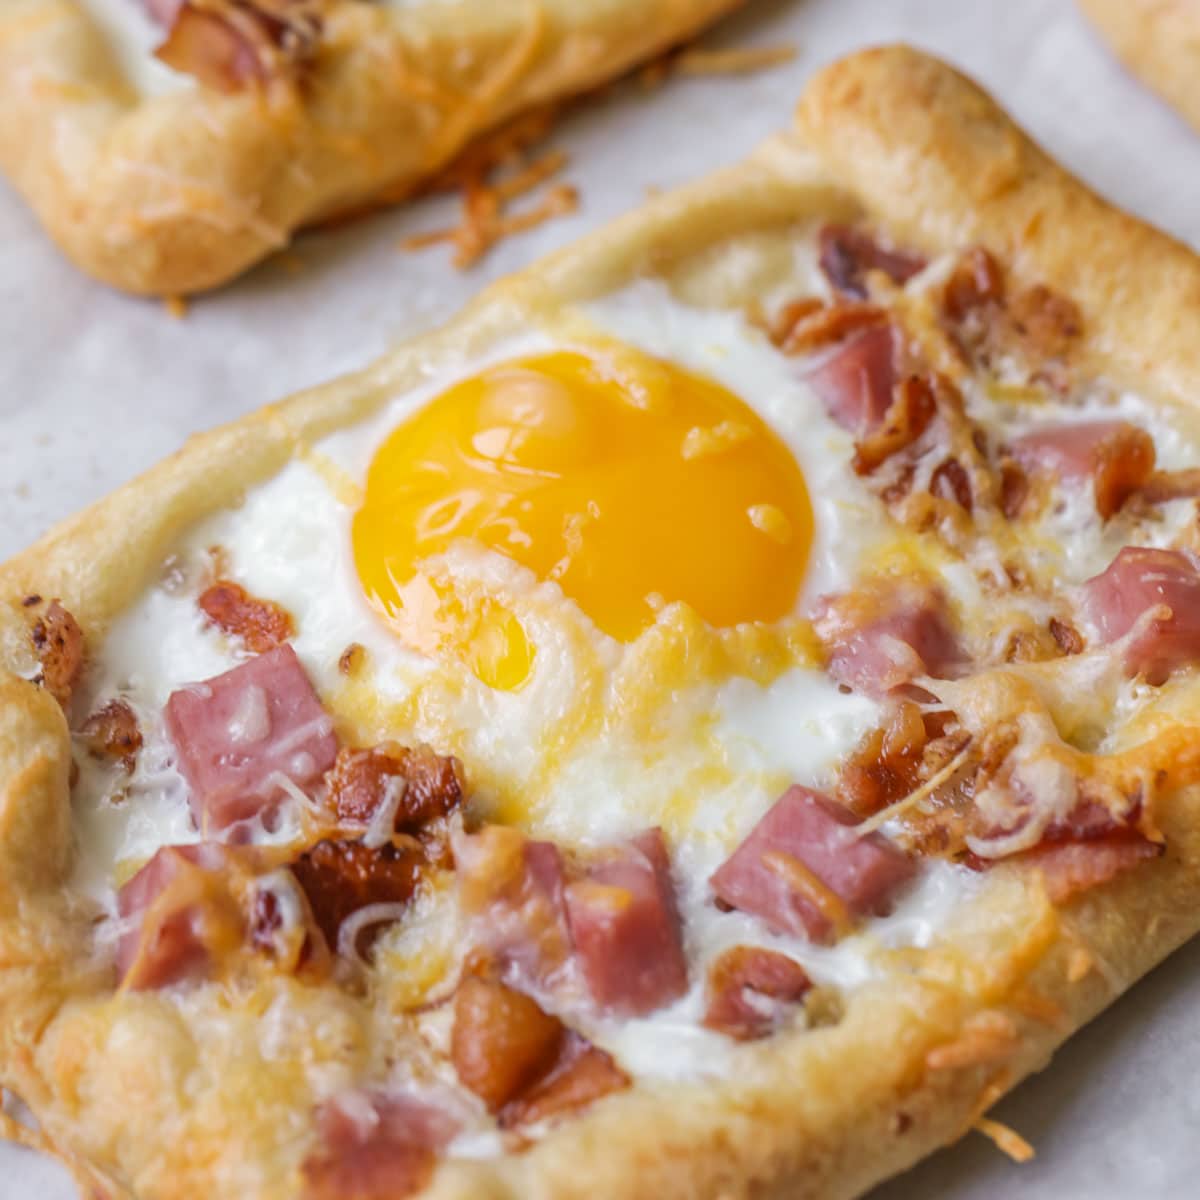 Thanksgiving breakfast ideas - close up of fried egg on a breakfast hand pie.